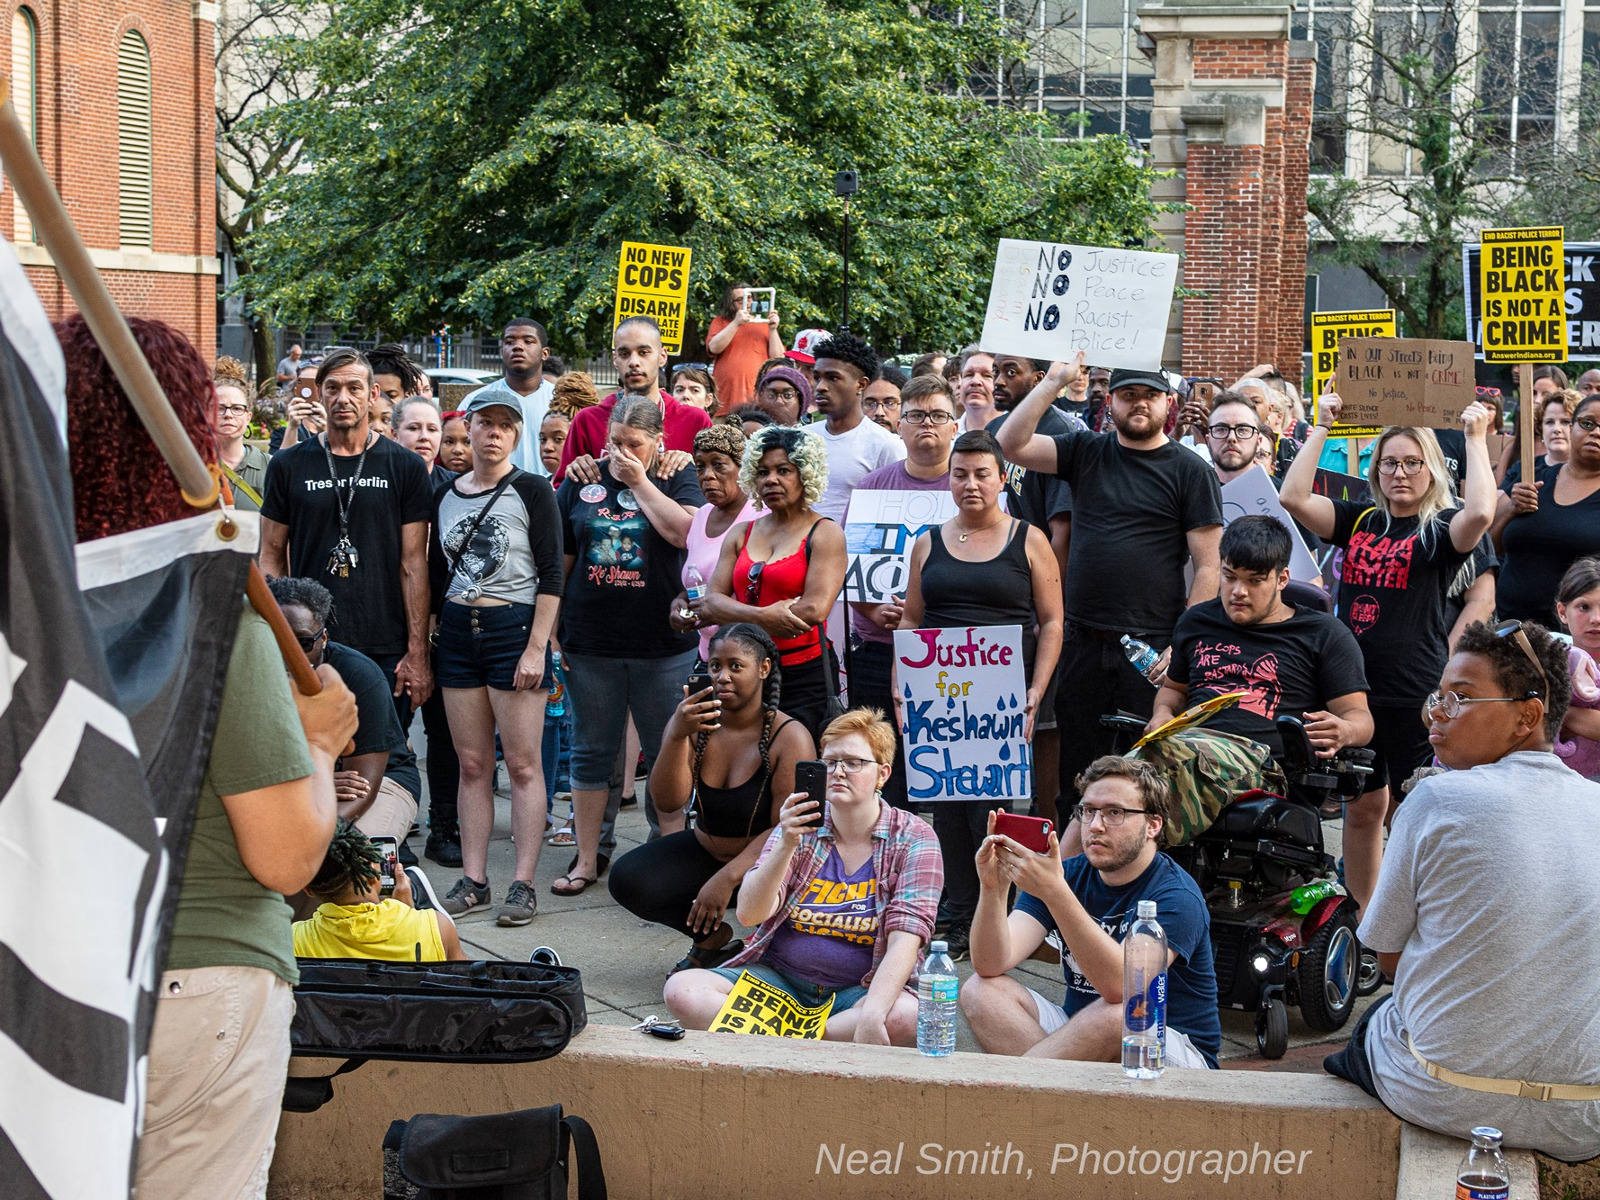 Protesters in Indianapolis on July 25 against police violence. Photo by Neal Smith.